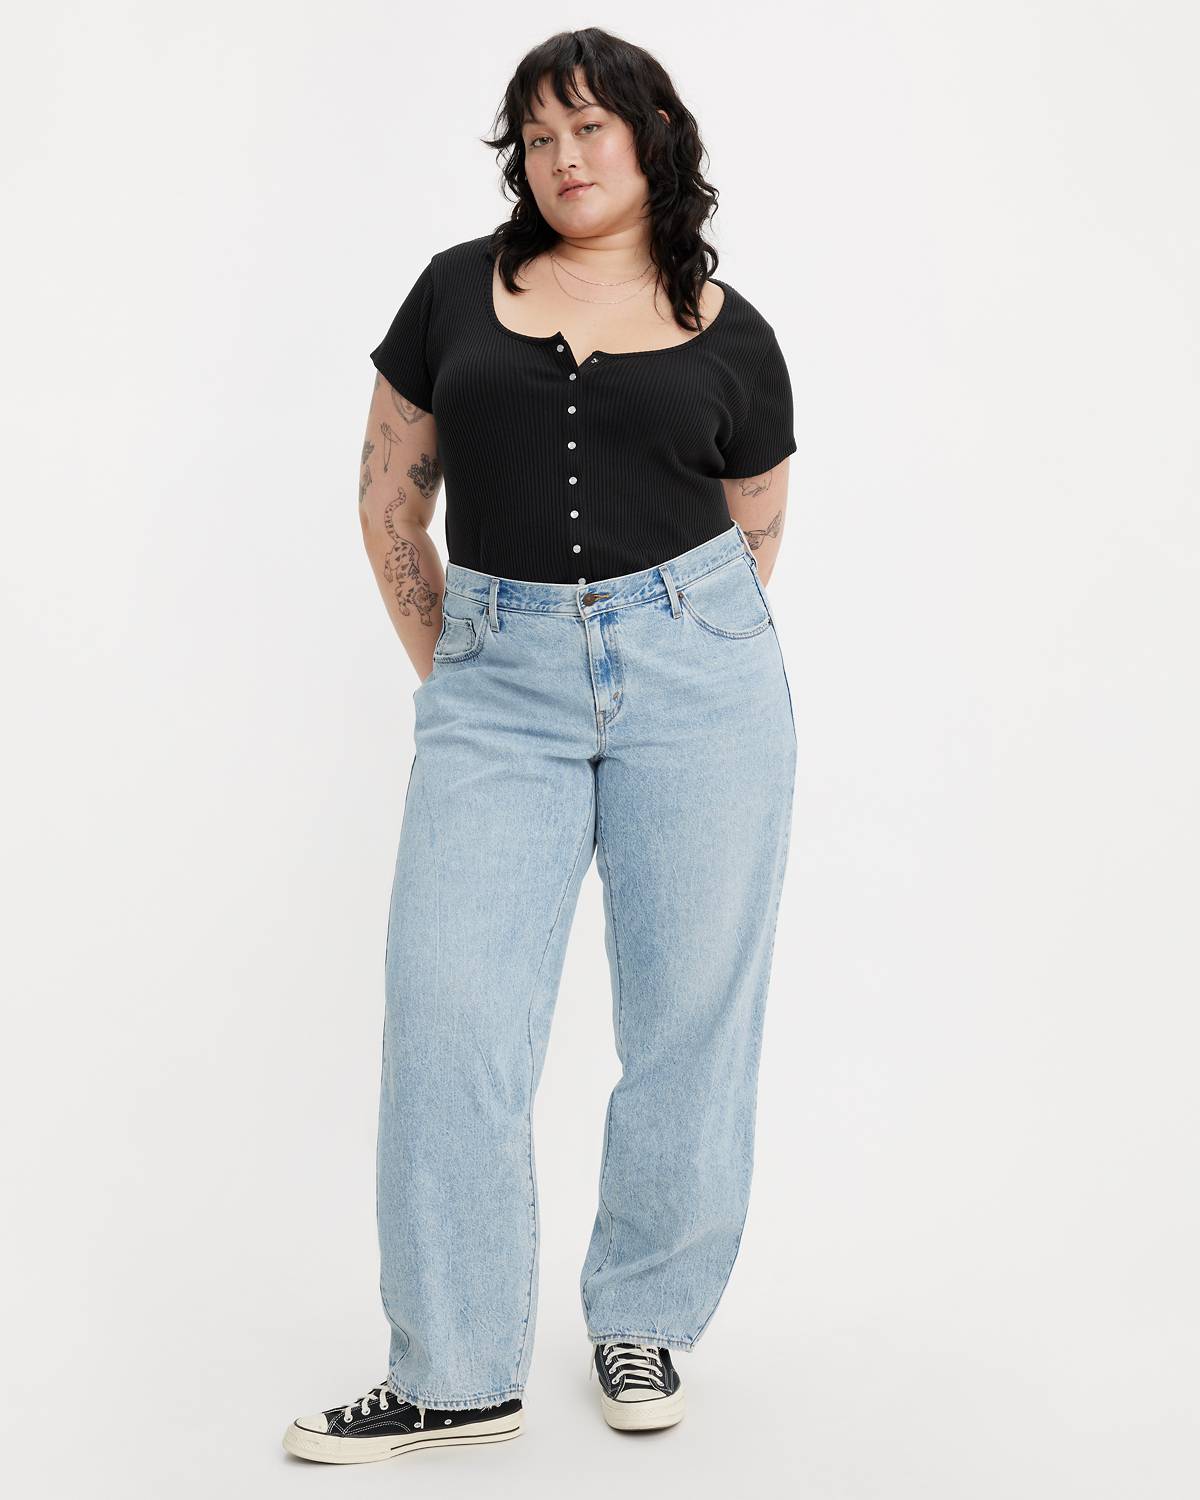 jeans pants with a black top.